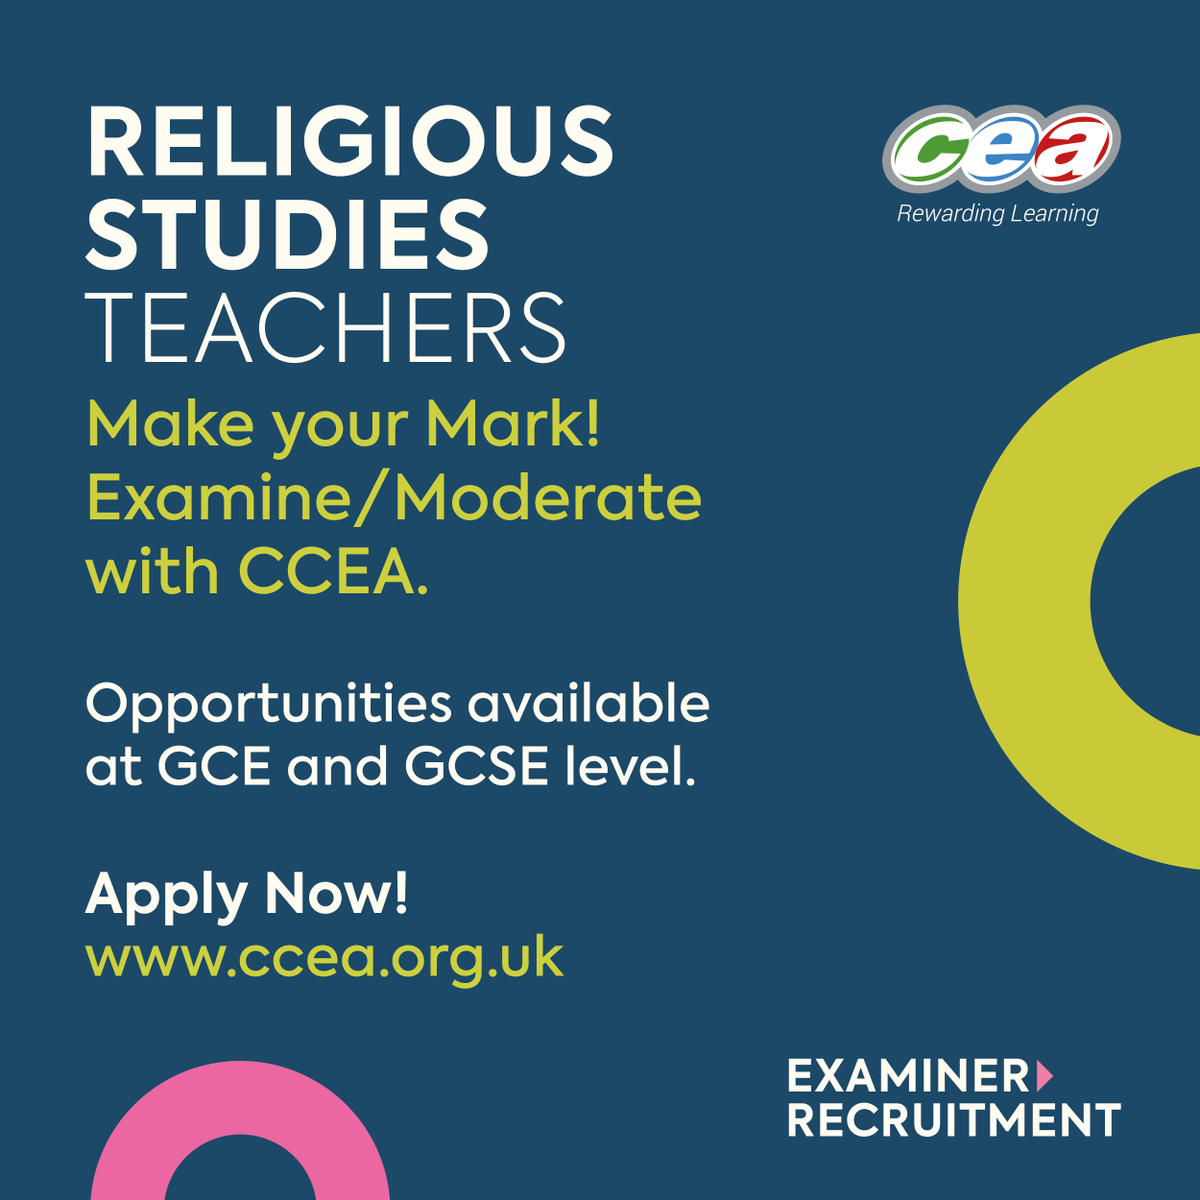 📣Calling all Religious Studies teachers! We are recruiting examiners and moderators for this subject, at both GCE & GCSE Level. If you would like to find out more and also information on how to apply, go to ow.ly/cuYL50LSbTt